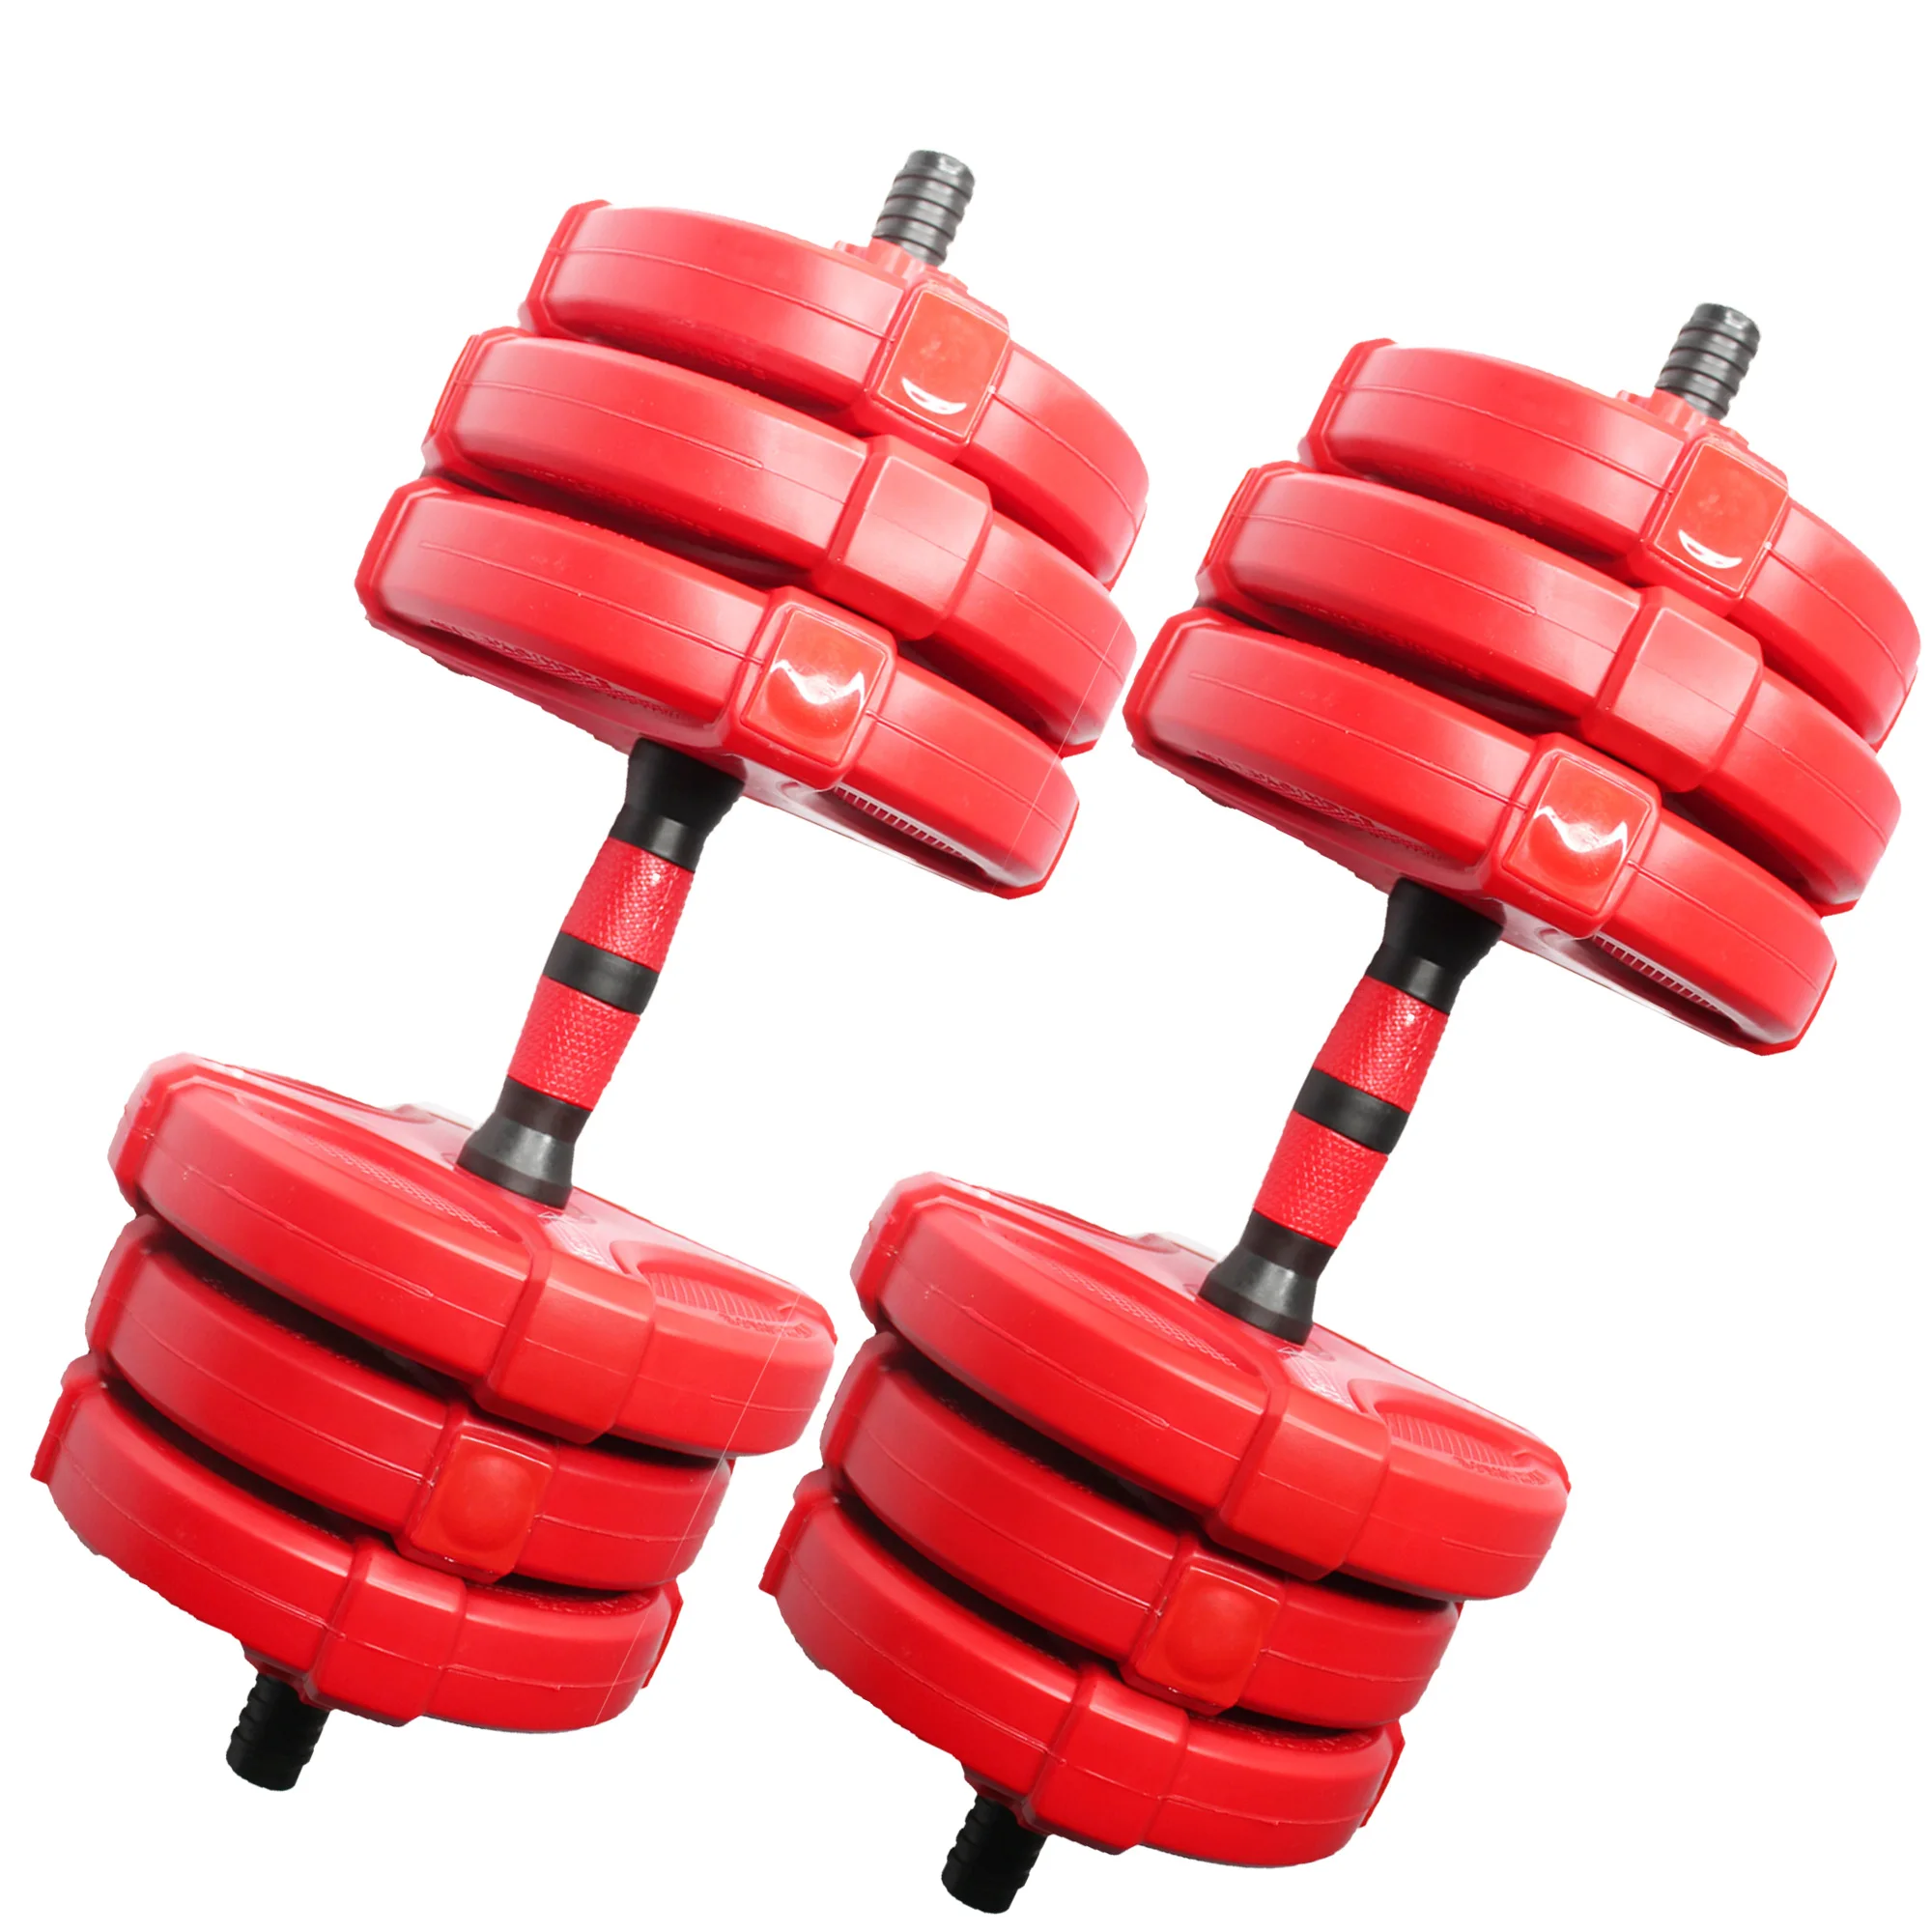 

MeiAo wholesale Weight Lifting fitness Adjustable cement Dumbbell Set For Bodybuilding equipment, Black, red, blue etc.